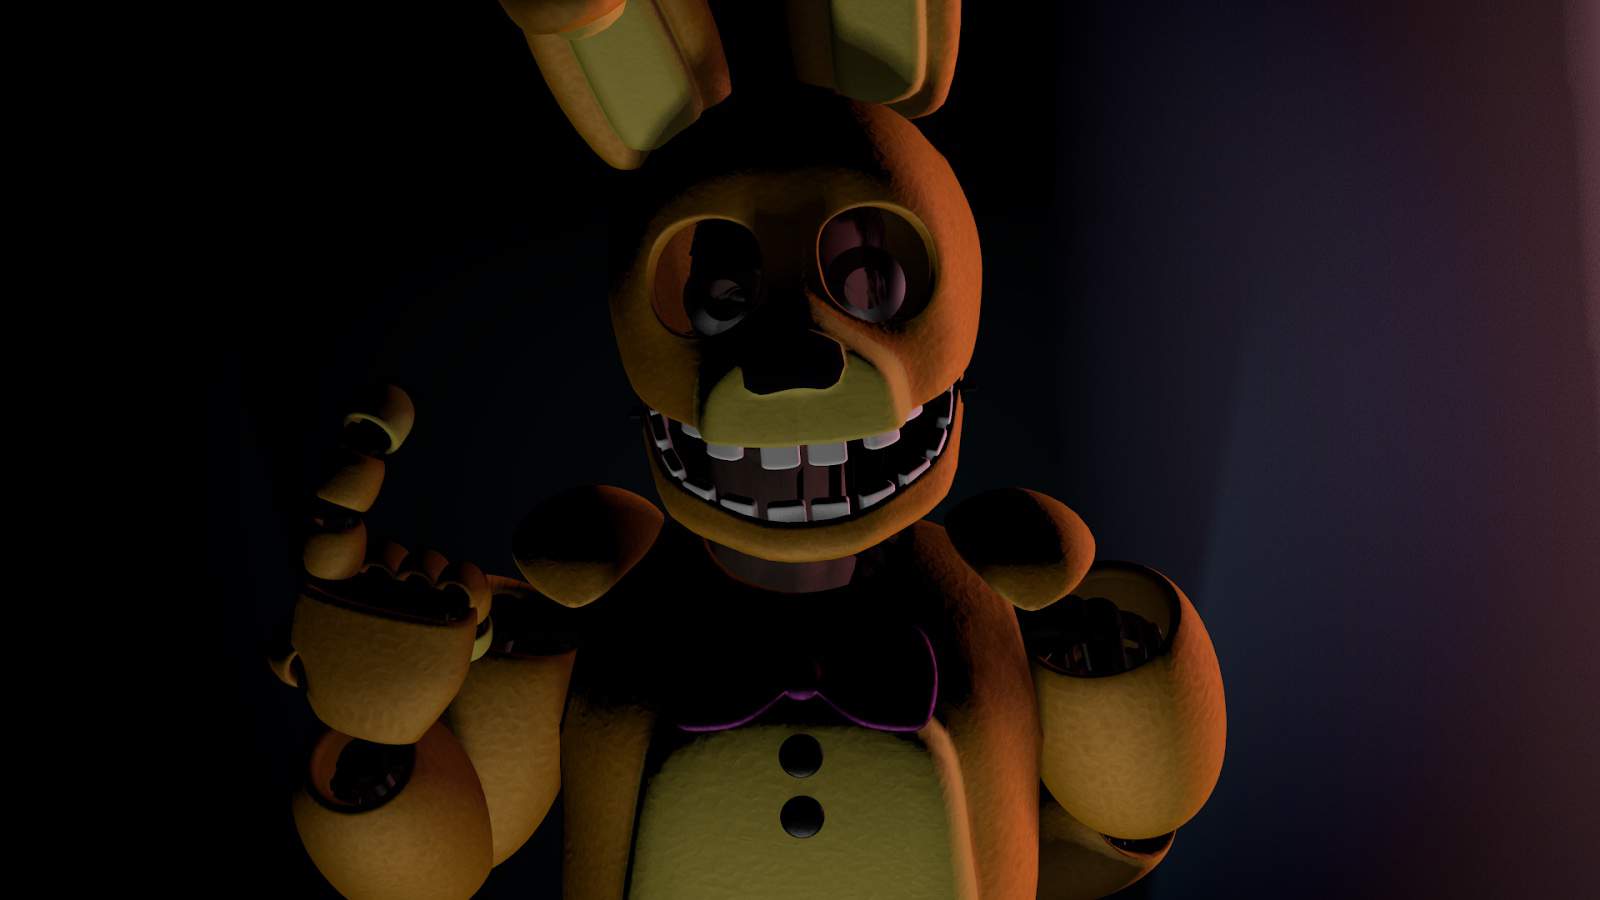  Spring Bonnie Wallpapers  7201560  for anon L  Tumbex